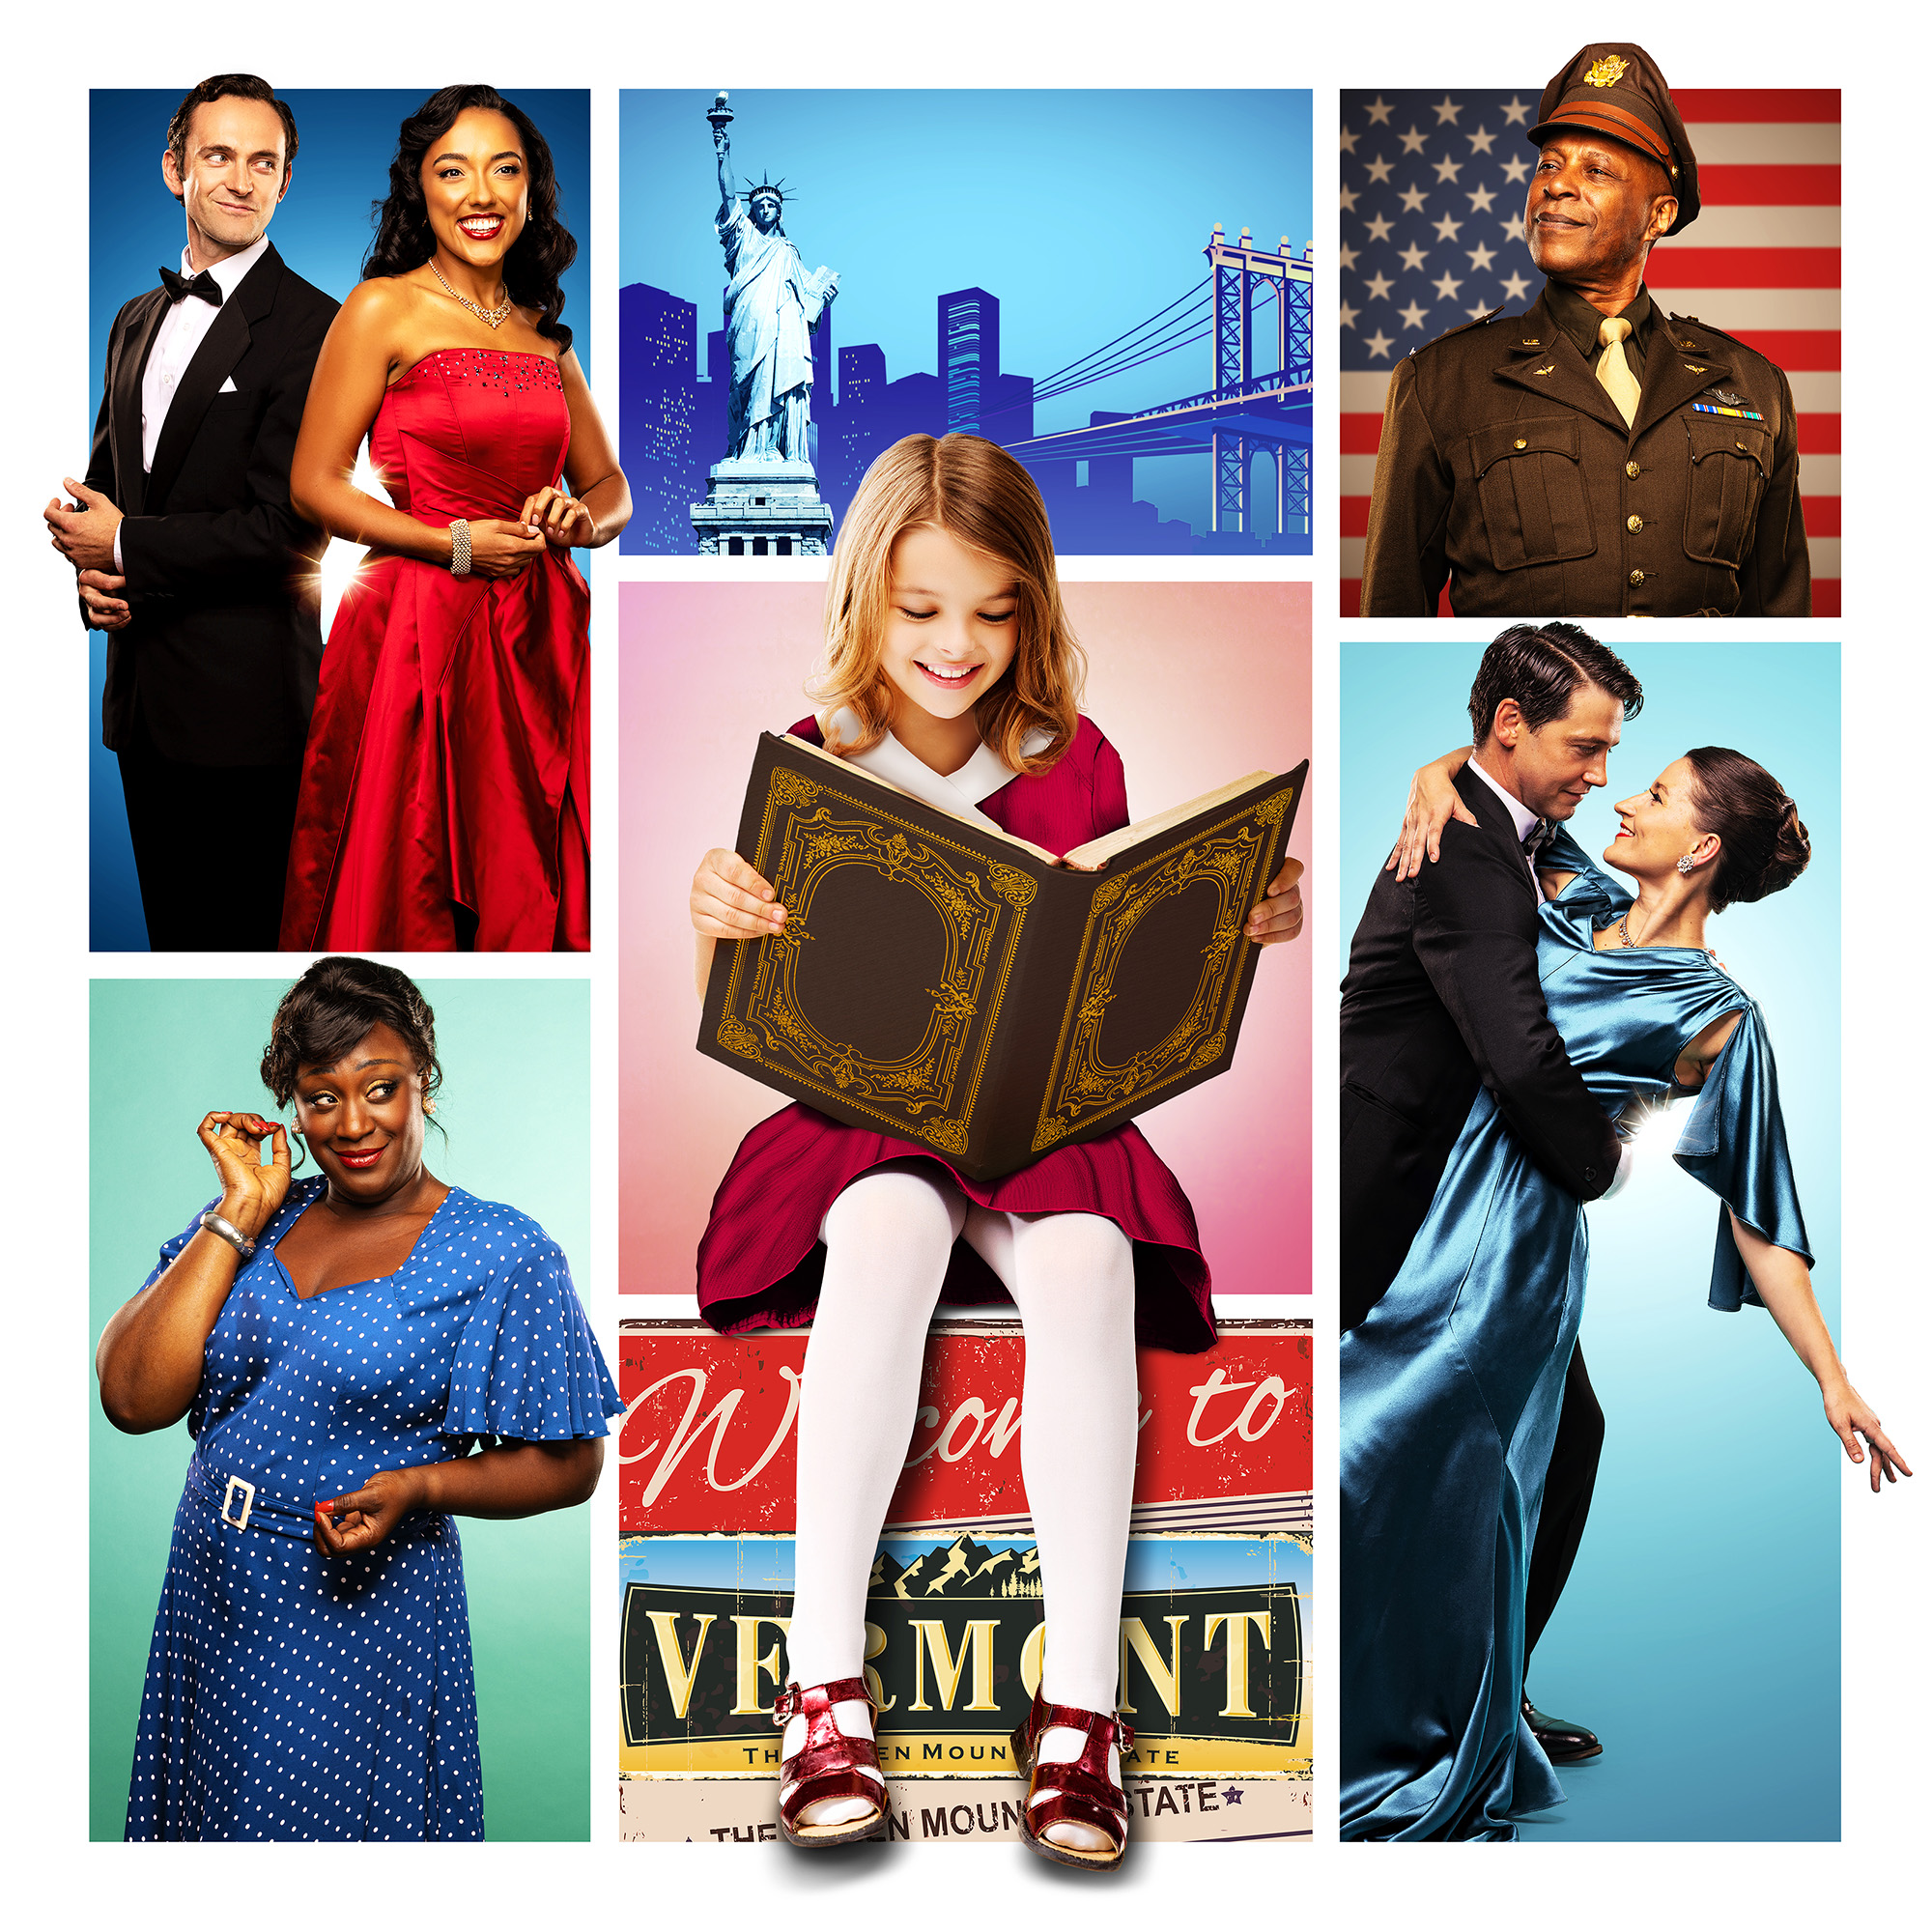 Irving Berlin's White Christmas, Photos by Michael Wharley, image concept by Muse